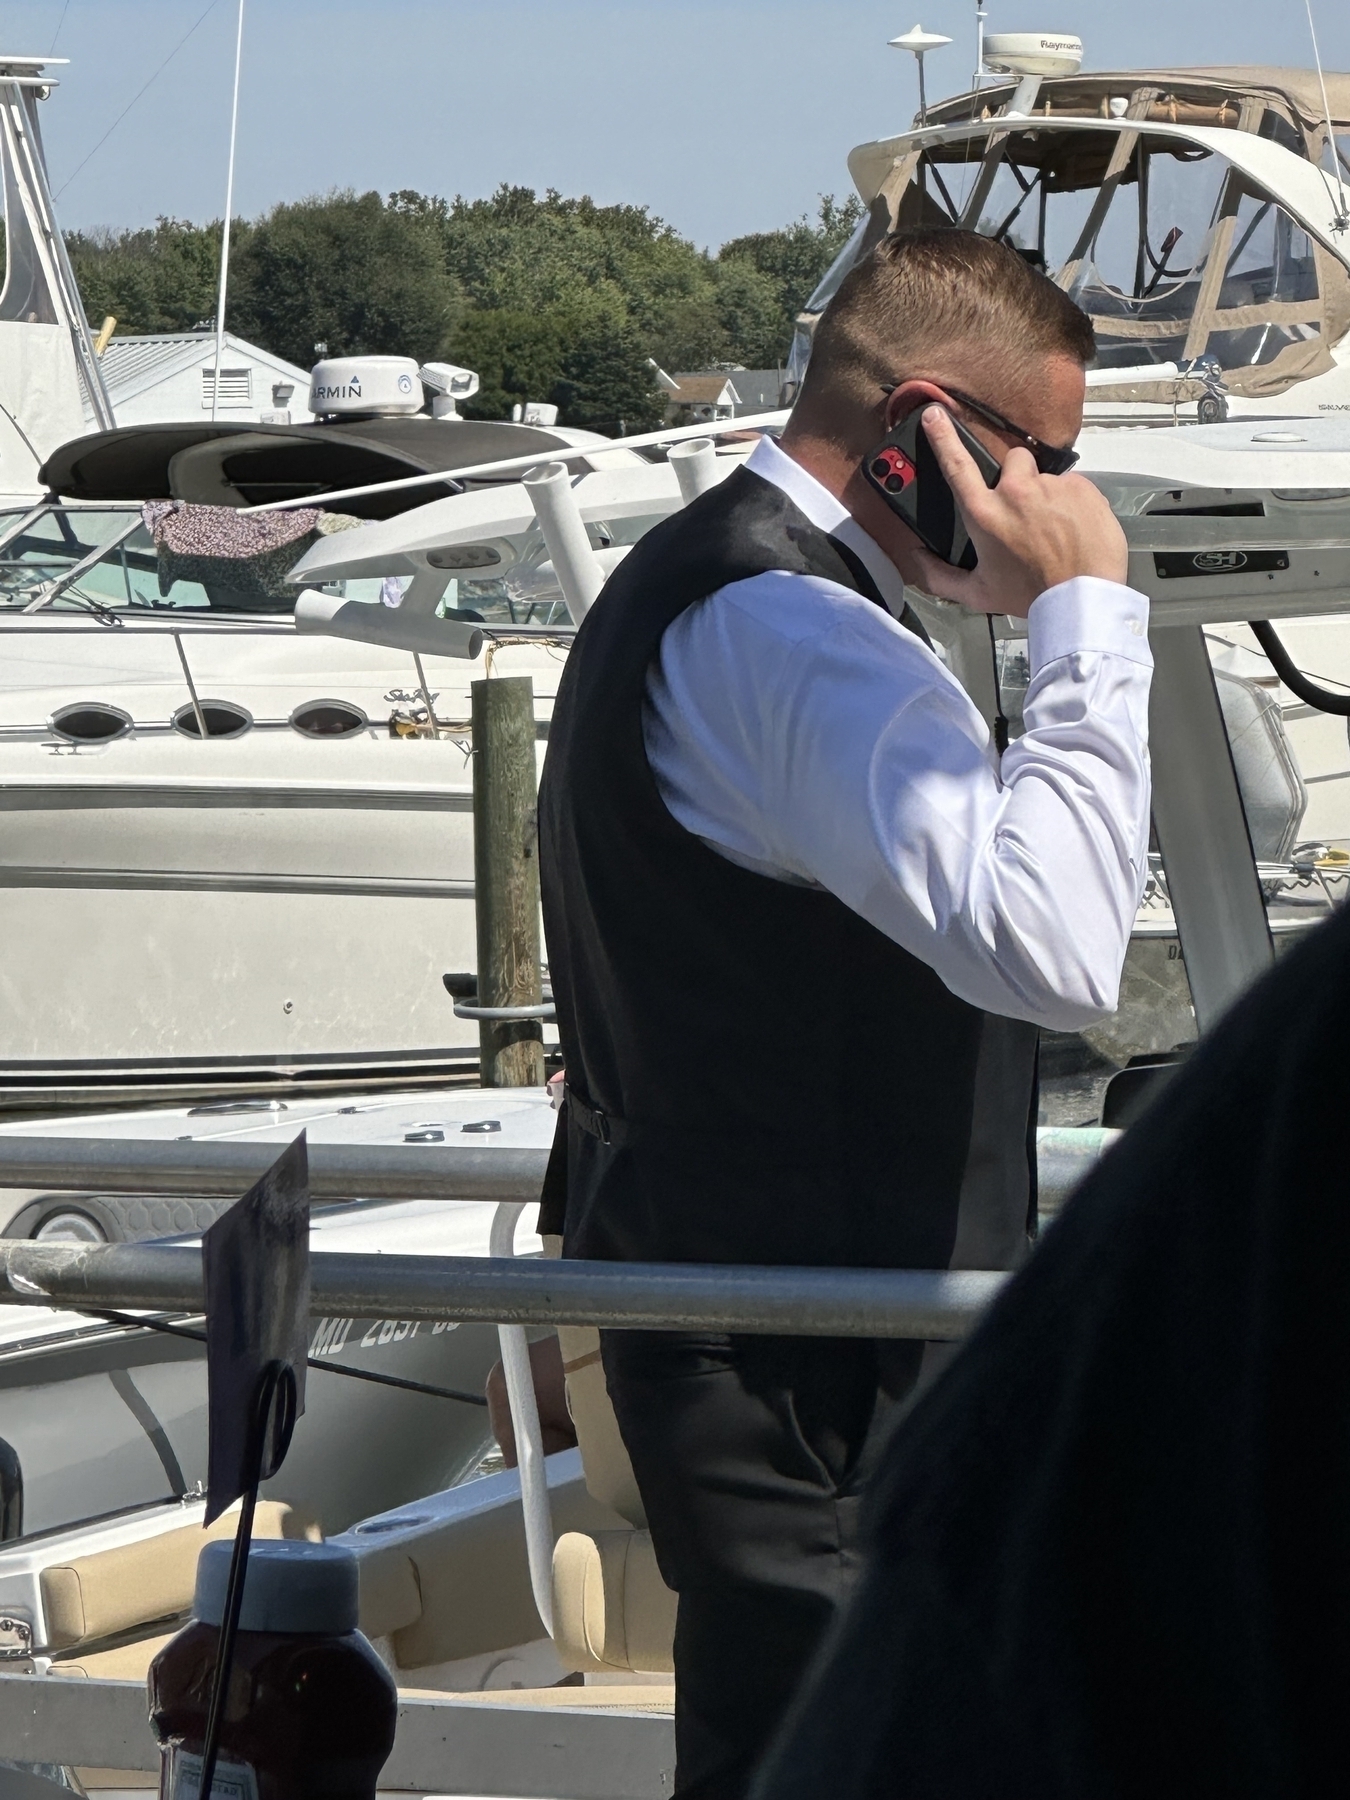 Man in black vest, white shirt, on cell phone surrounded by boats.  